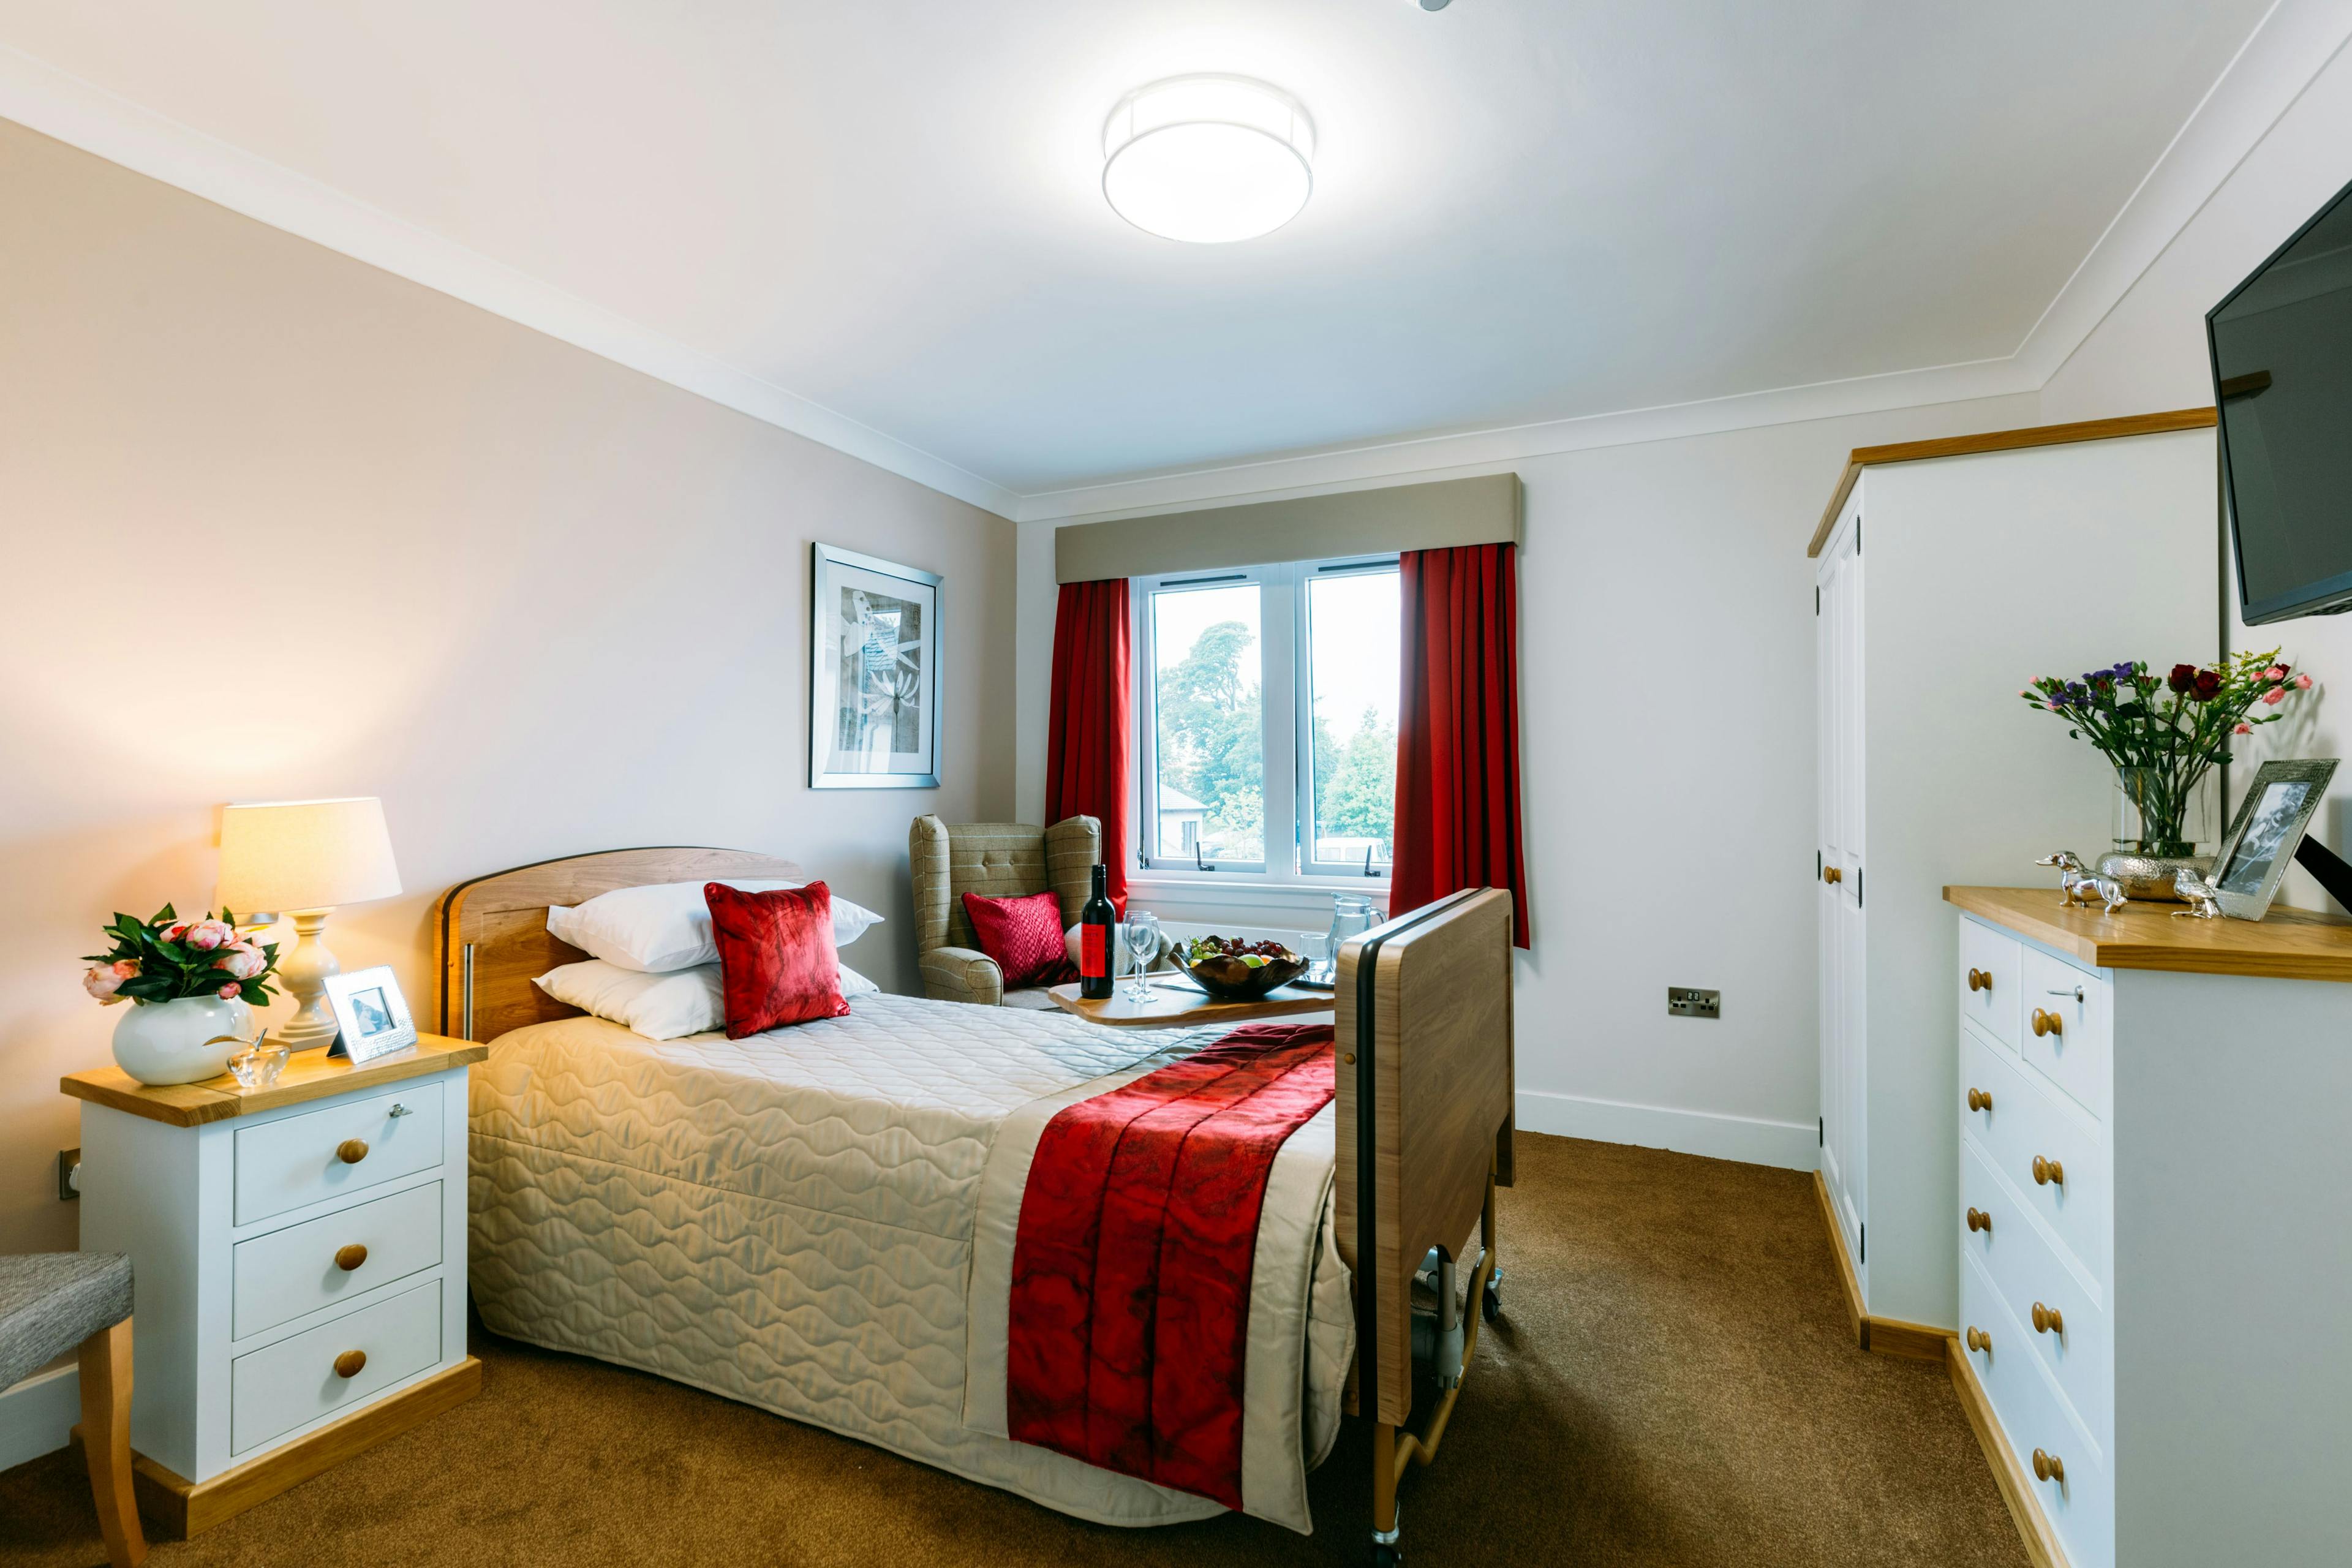 Bedroom at South Grange Care Home in The City of Dundee, Scotland